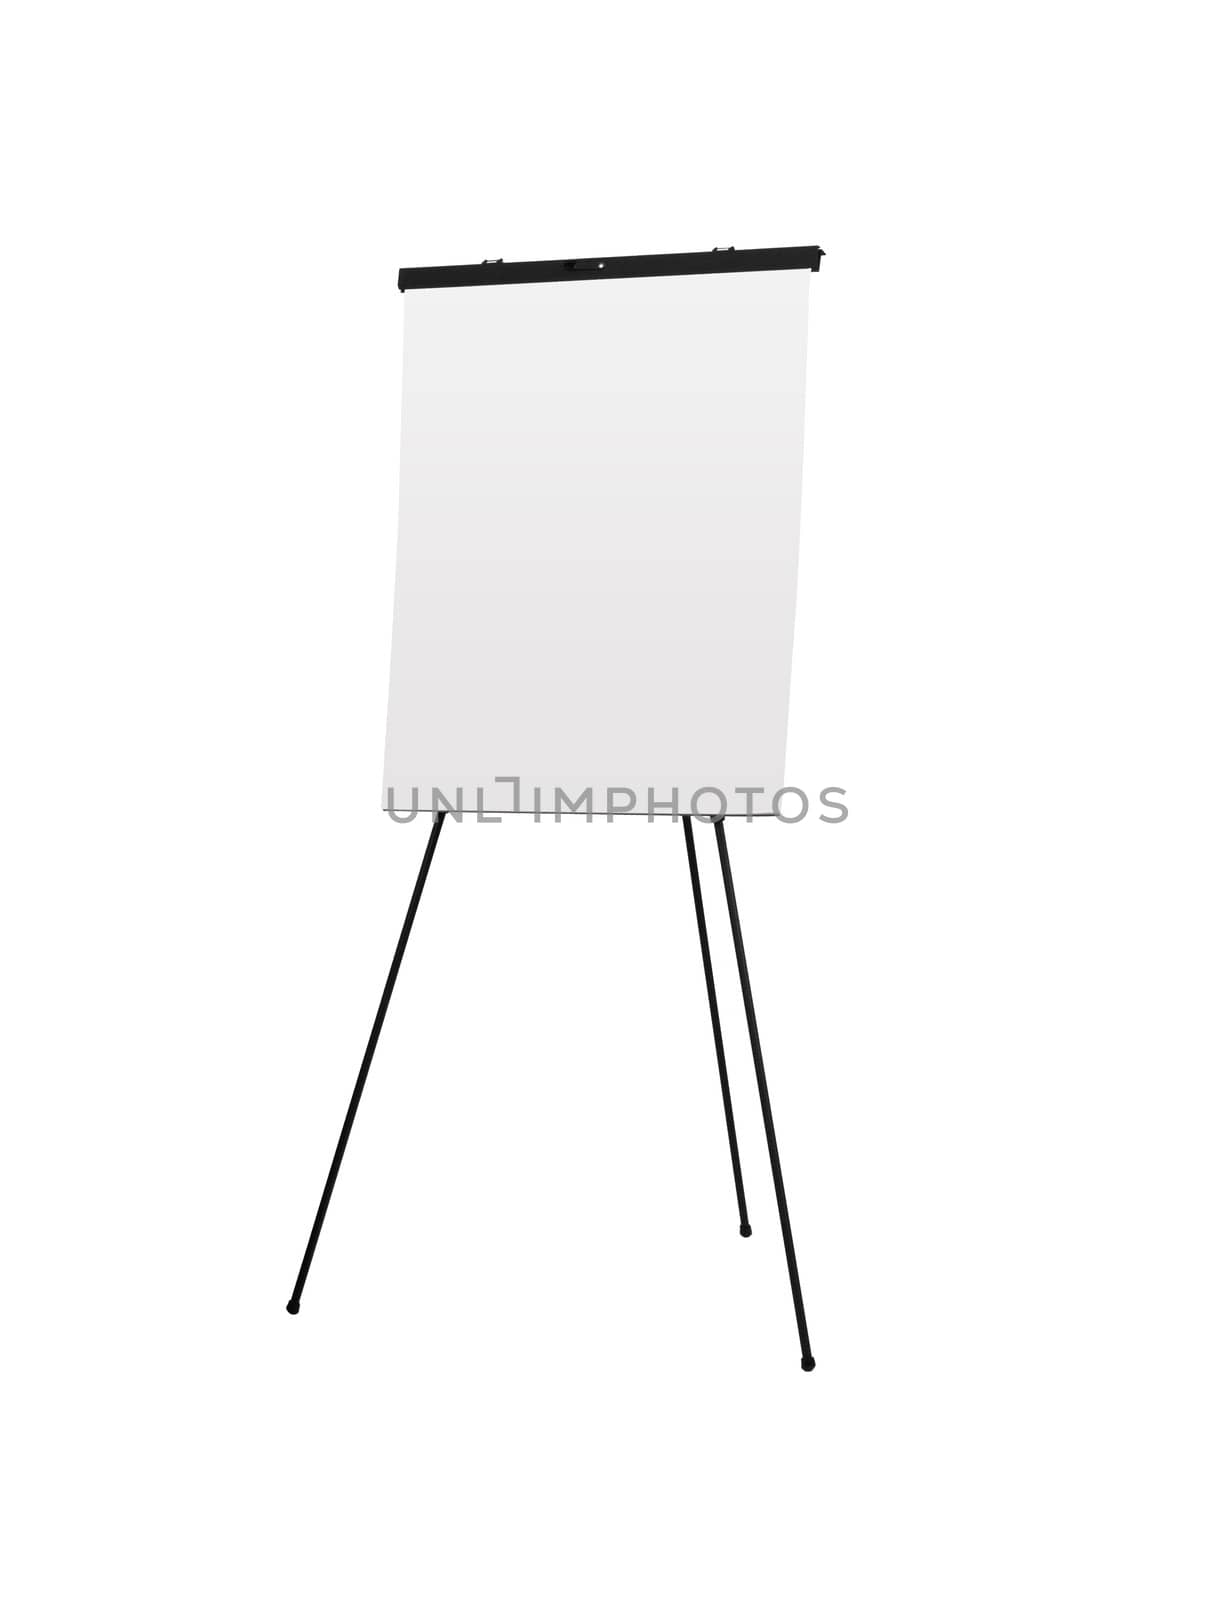 Flip Chart isolated on a white background